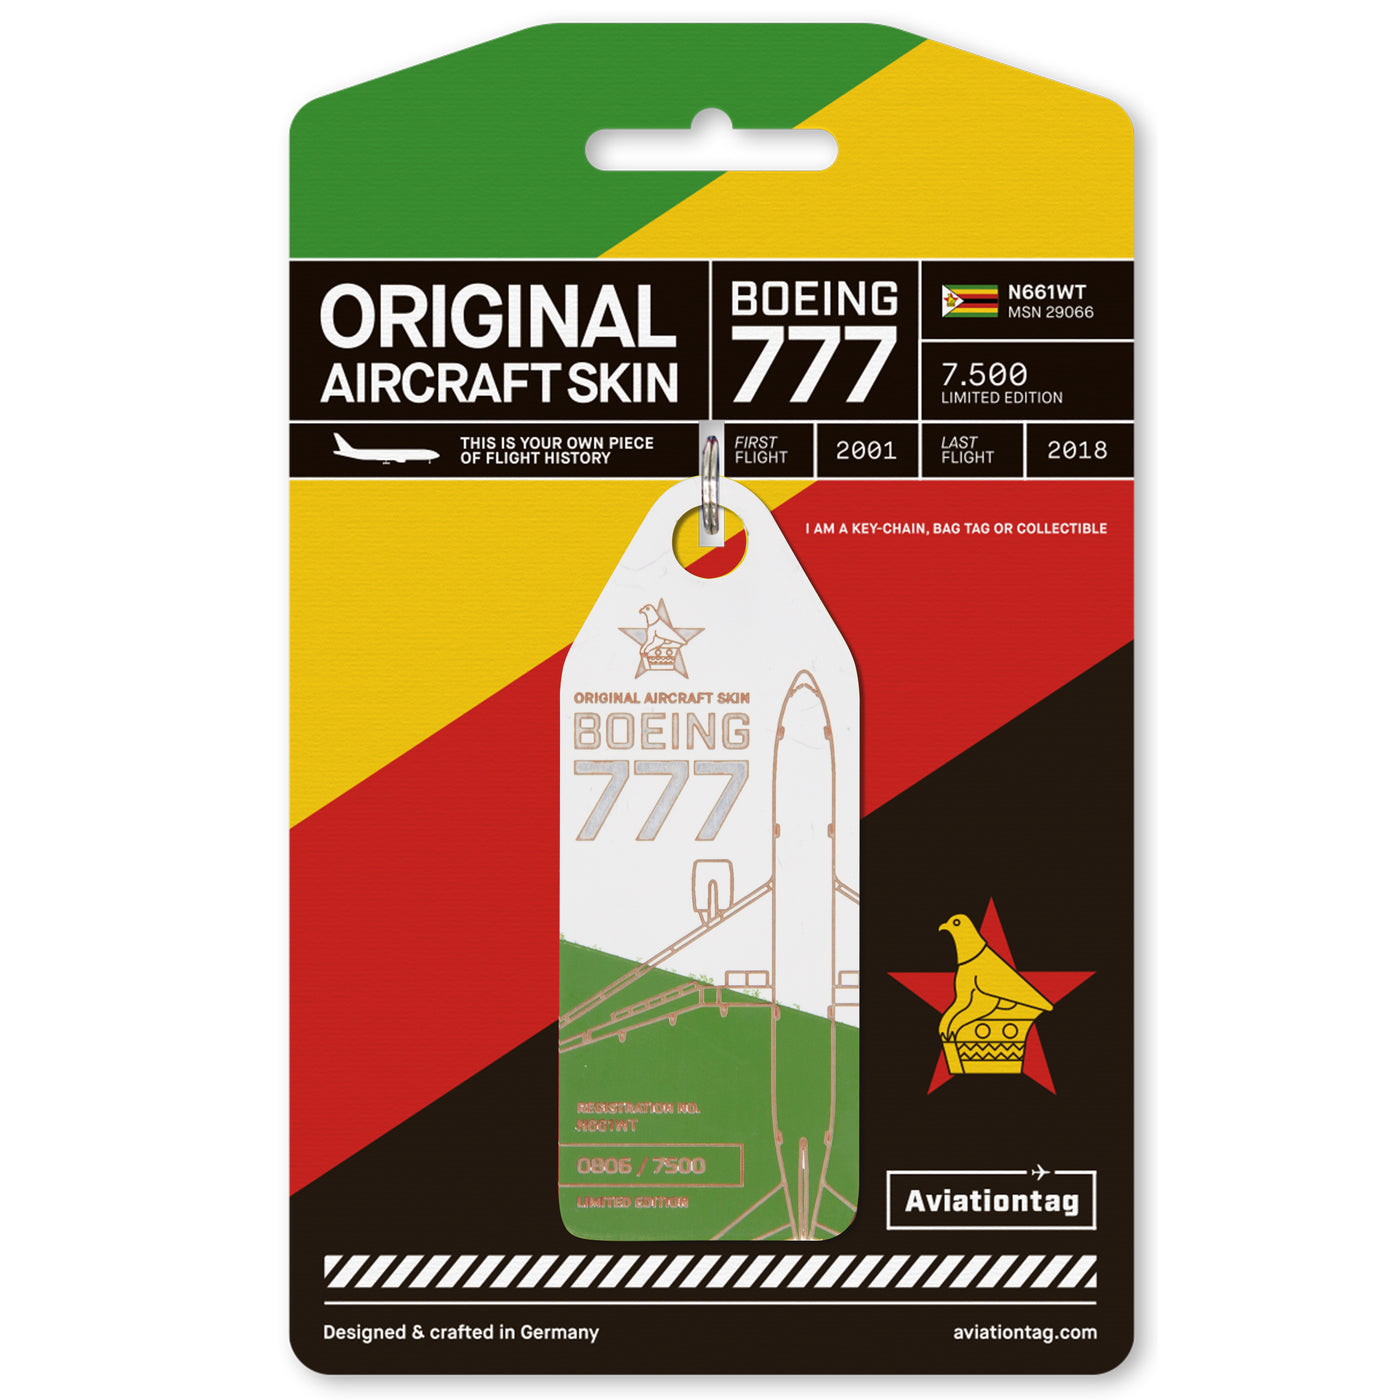 Aviationtag Boeing 777 N661WT Edition Air Zimbabwe Bicolor